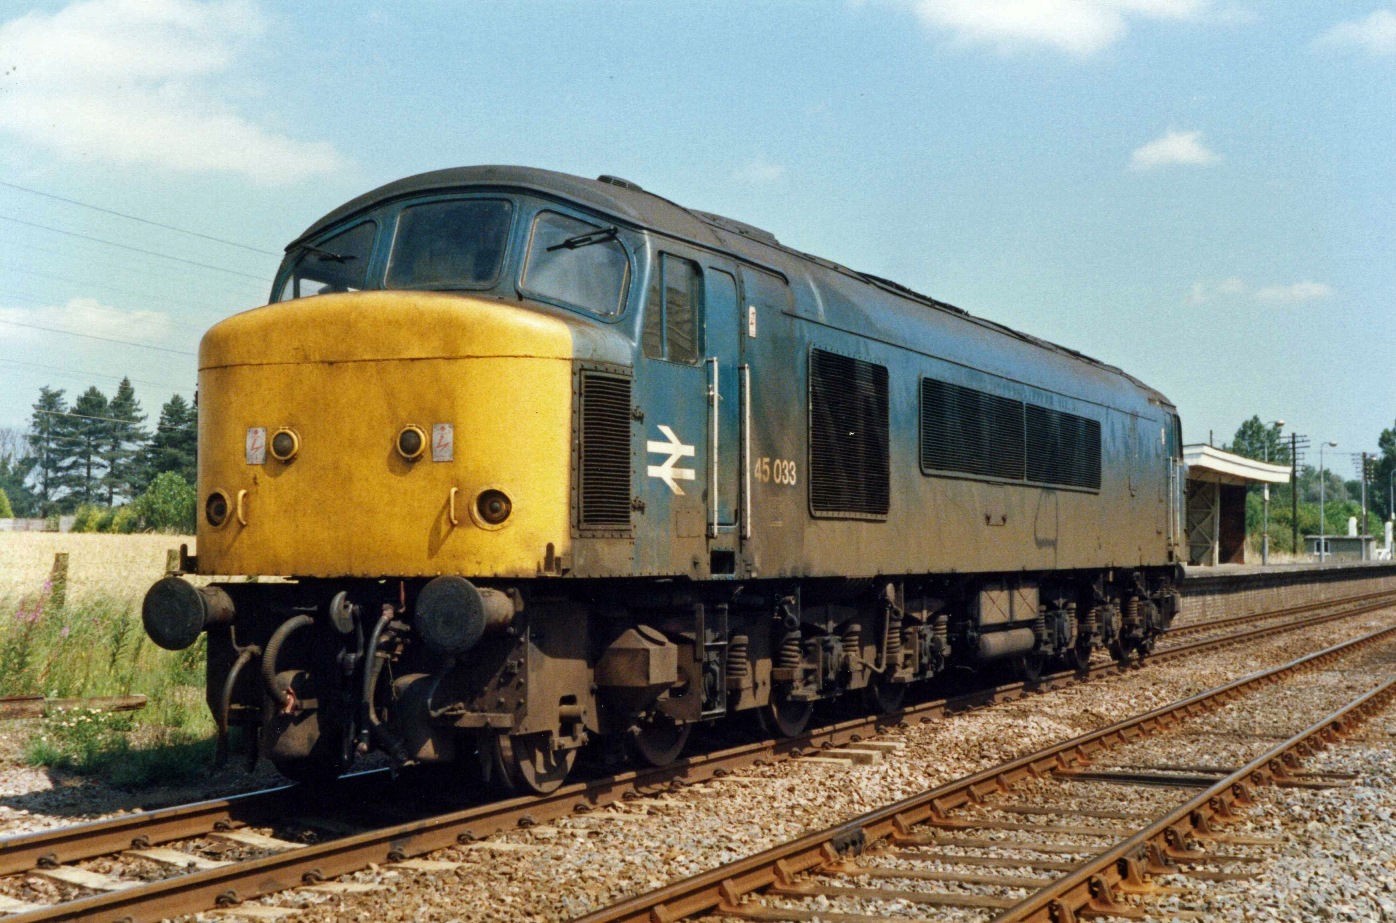 45033 eccles road after shunting grain empties 09.30 whitemore norwich 23 7 85 y